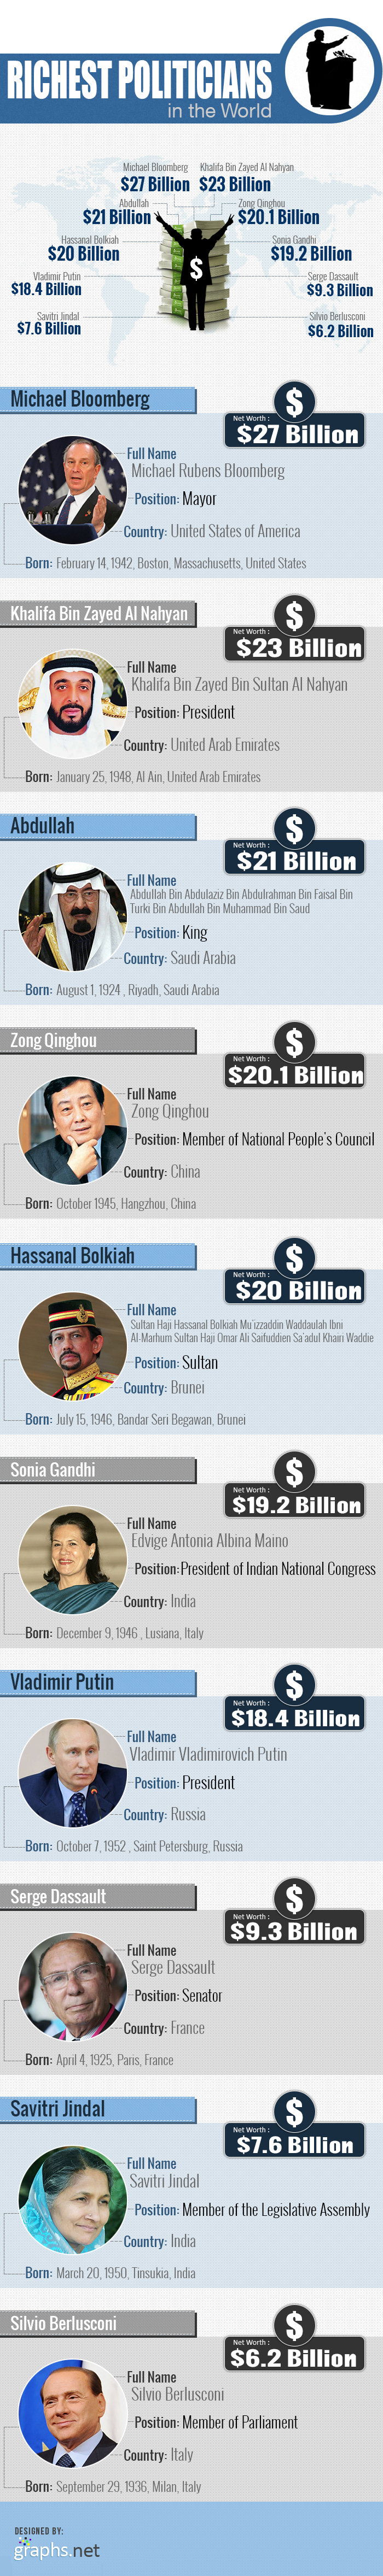 Richest Politicians in the World 